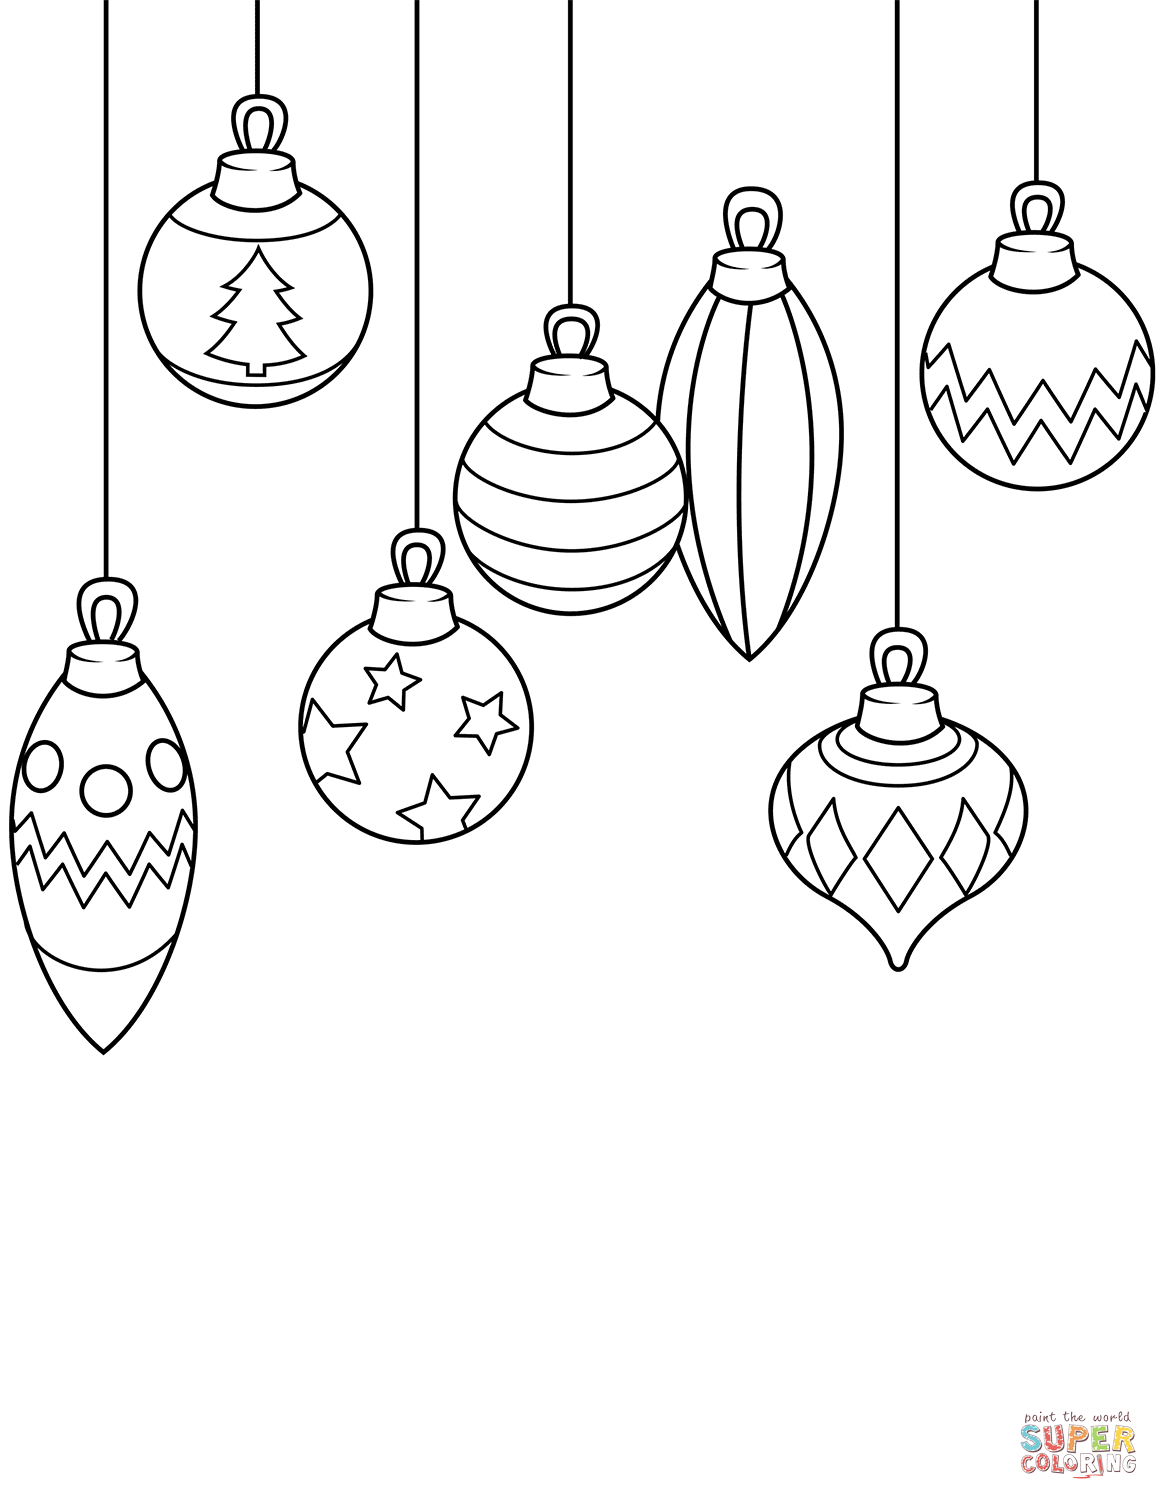 Christmas Ornaments Coloring Page | Free Printable Coloring Pages - Free Printable Ornaments To Color